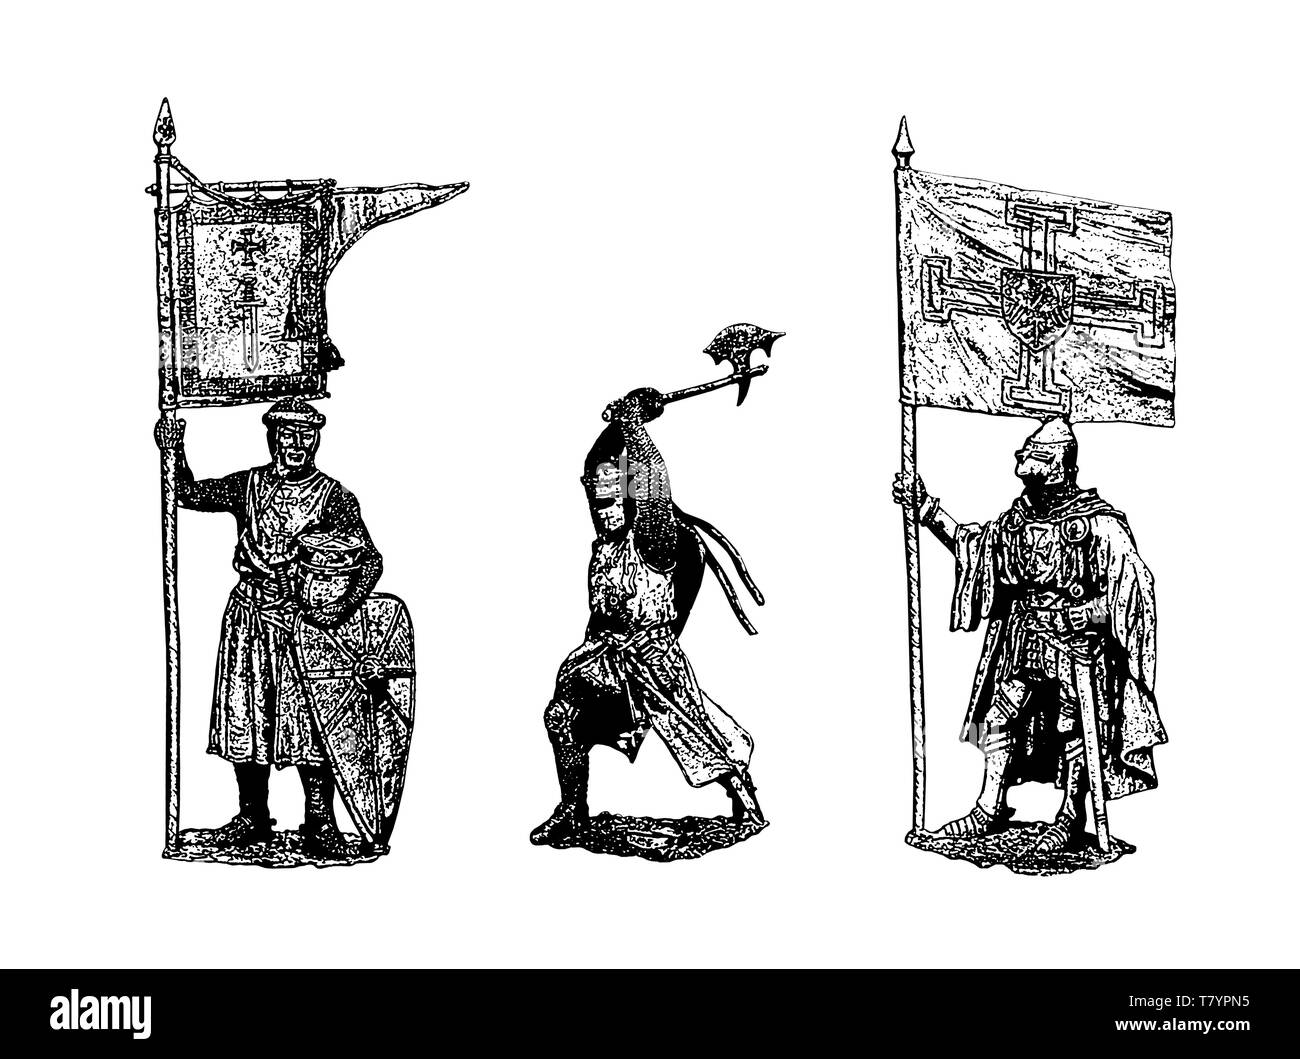 Medieval knights illustration. Knight picture. Set of 3 medieval crusaders. Digital drawing. Stock Photo